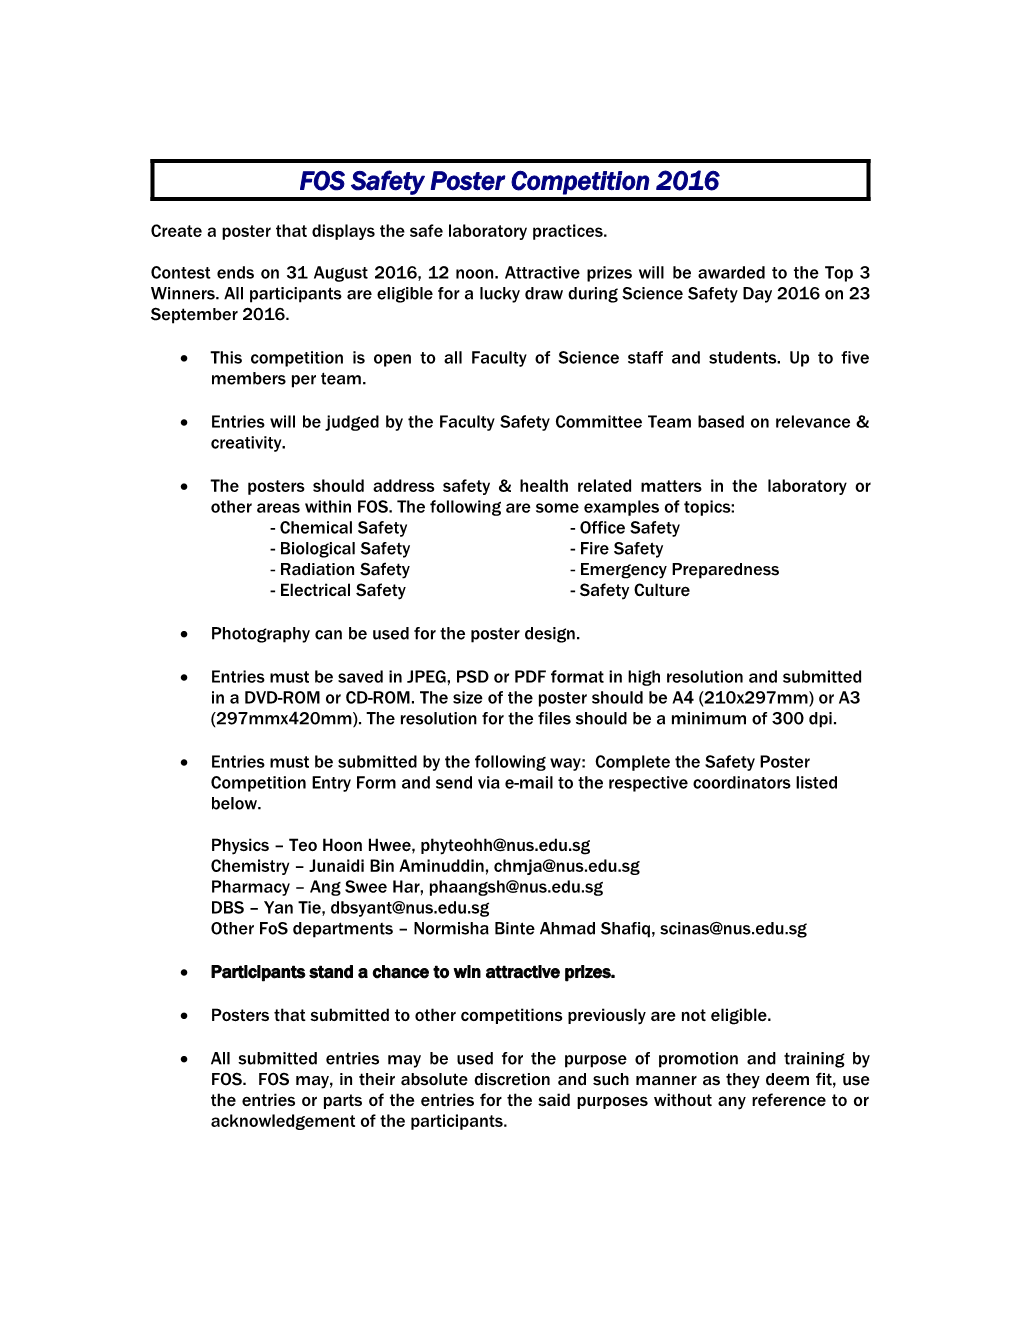 FOS Safety Poster Competition 2016